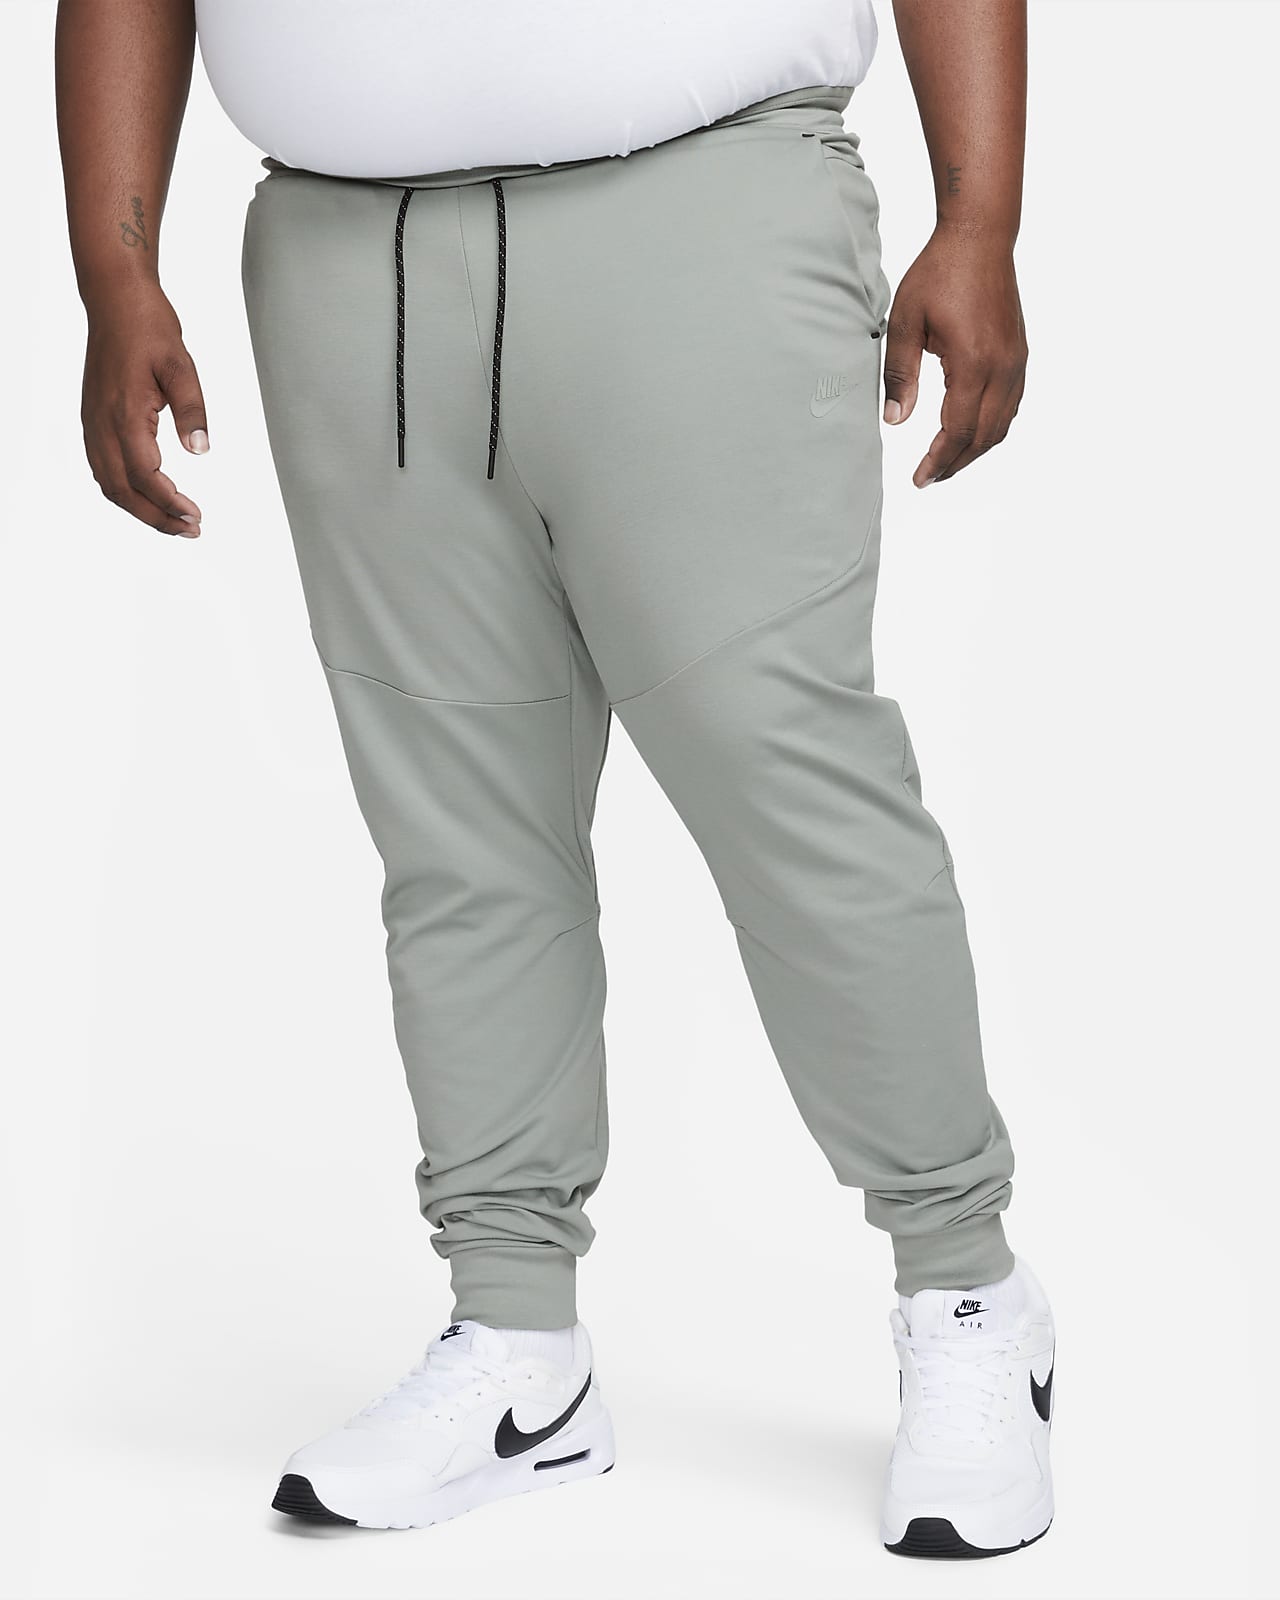 Sweatpants for Men Active Fleece Jogger Track Pants with Cargo